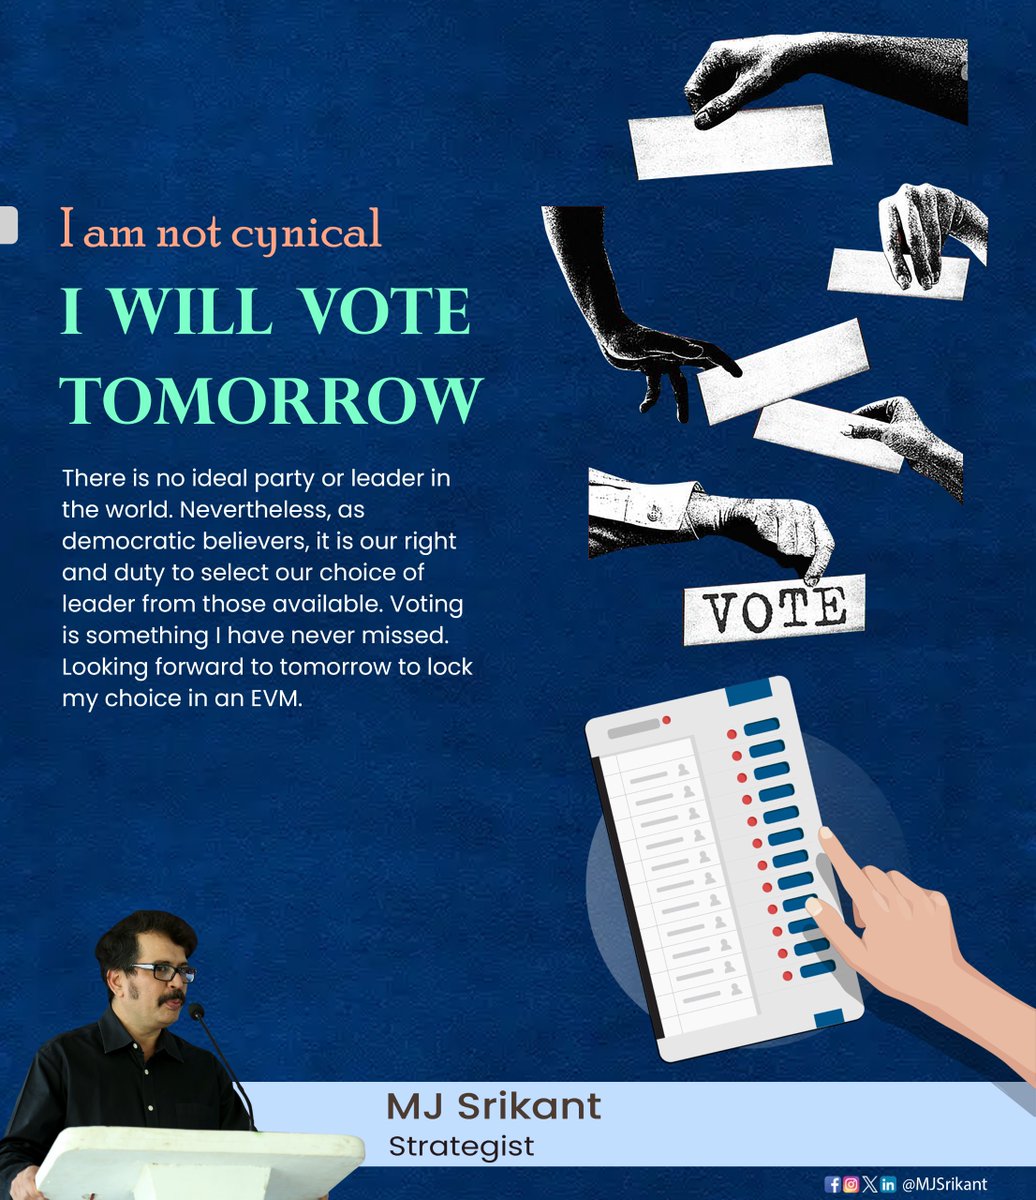 I am not cynical; I will vote tomorrow

#IndianElections #Democracy #VoteIndia #ElectionDay #Politics #ElectoralProcess #VotingRights #CitizenParticipation #PoliticalParties #ElectionCommission #BallotBox #CampaignTrail #ElectoralReforms #ElectoralSystem